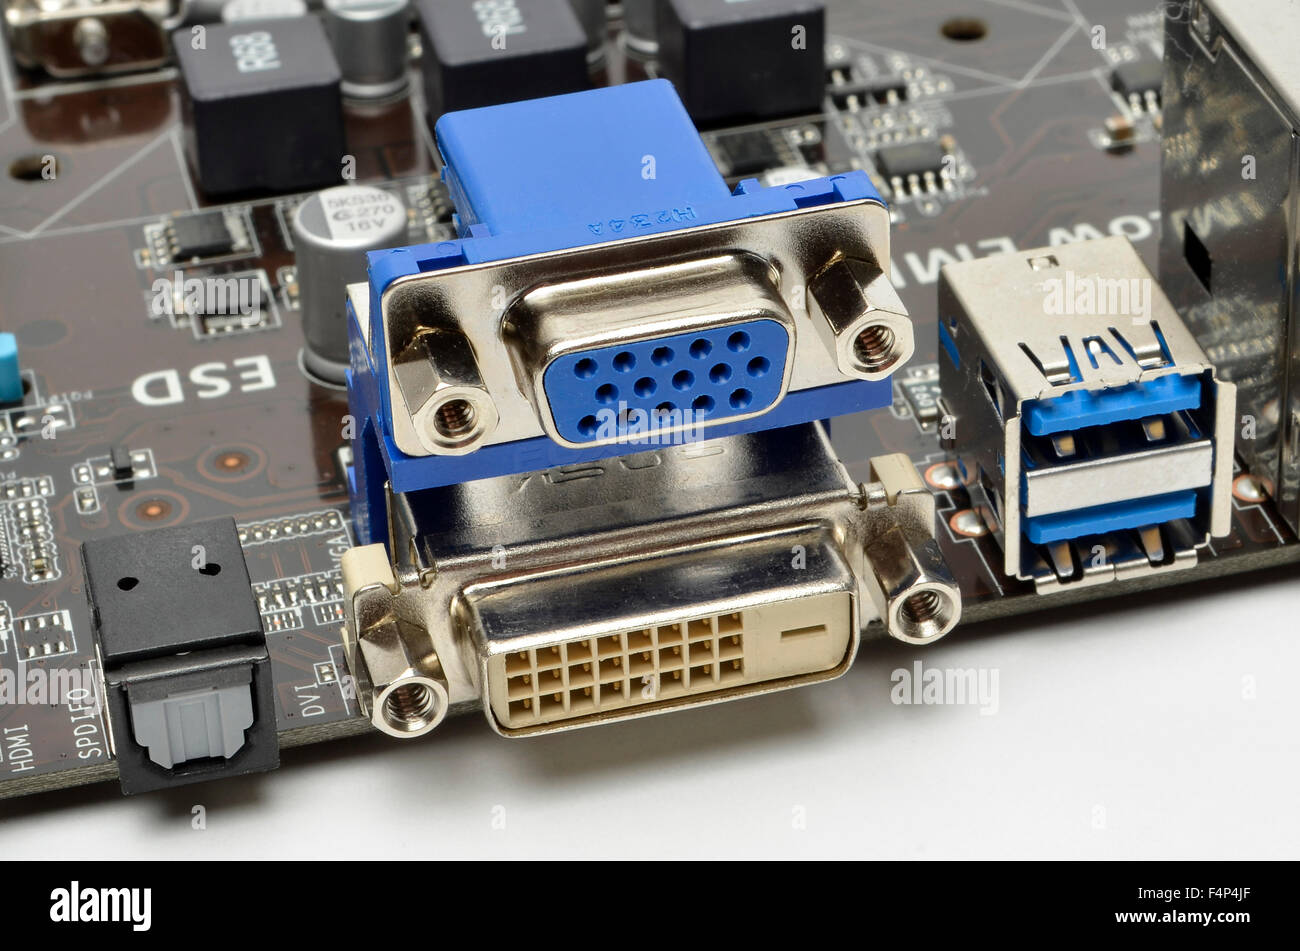 I/O ports on the rear of an ASUS motherboard, including left to right S/PDIF, VGA, DVI-D, and twin USB 3.0 sockets. Stock Photo